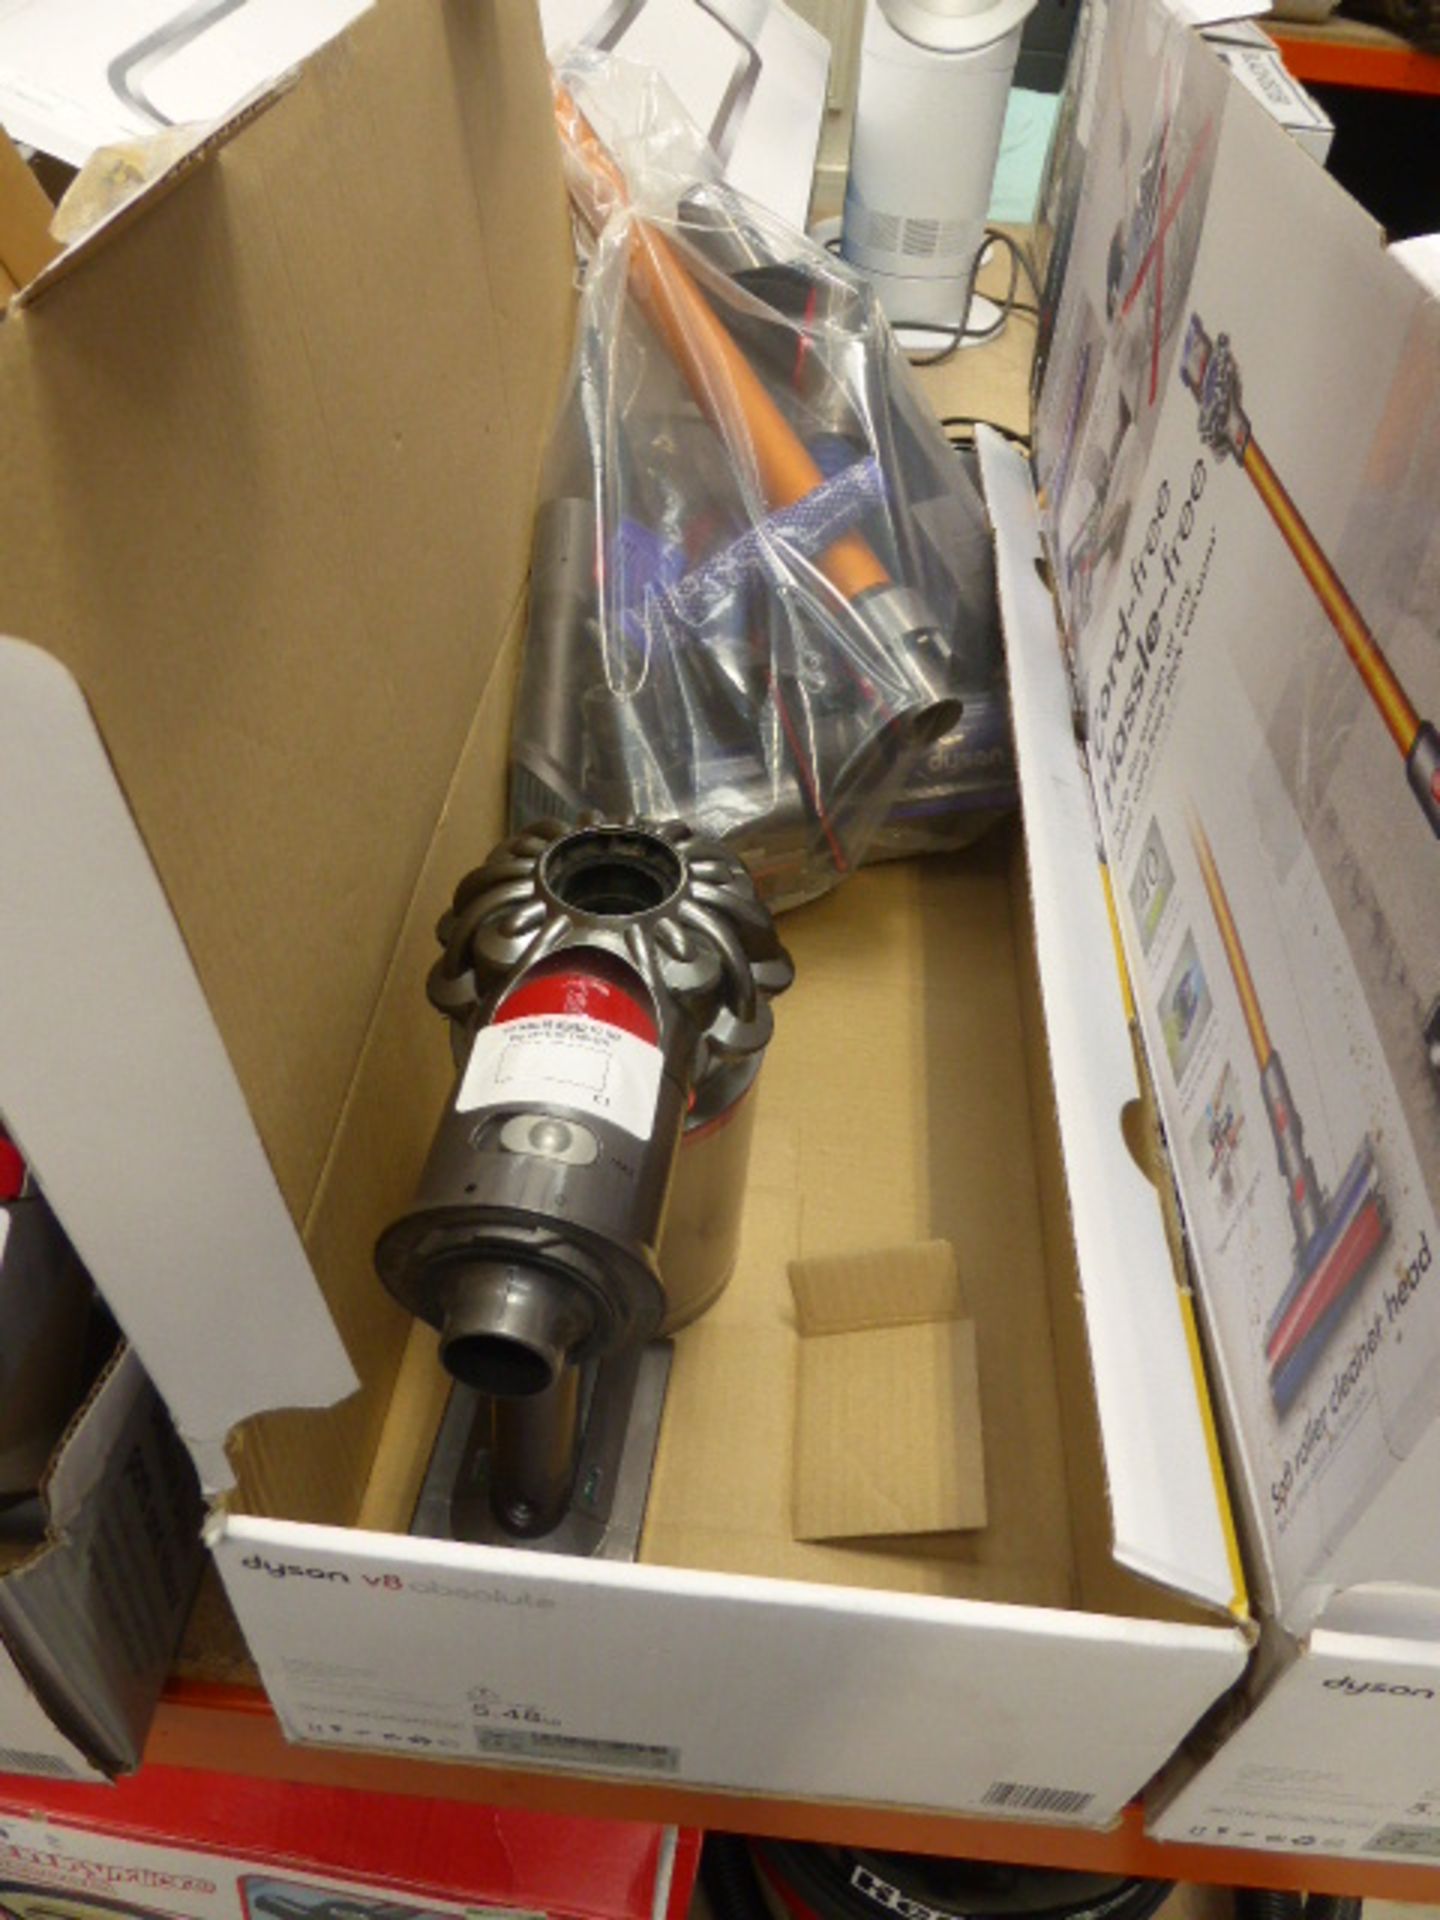 Hand held Dyson V8 absolute with box and accessories